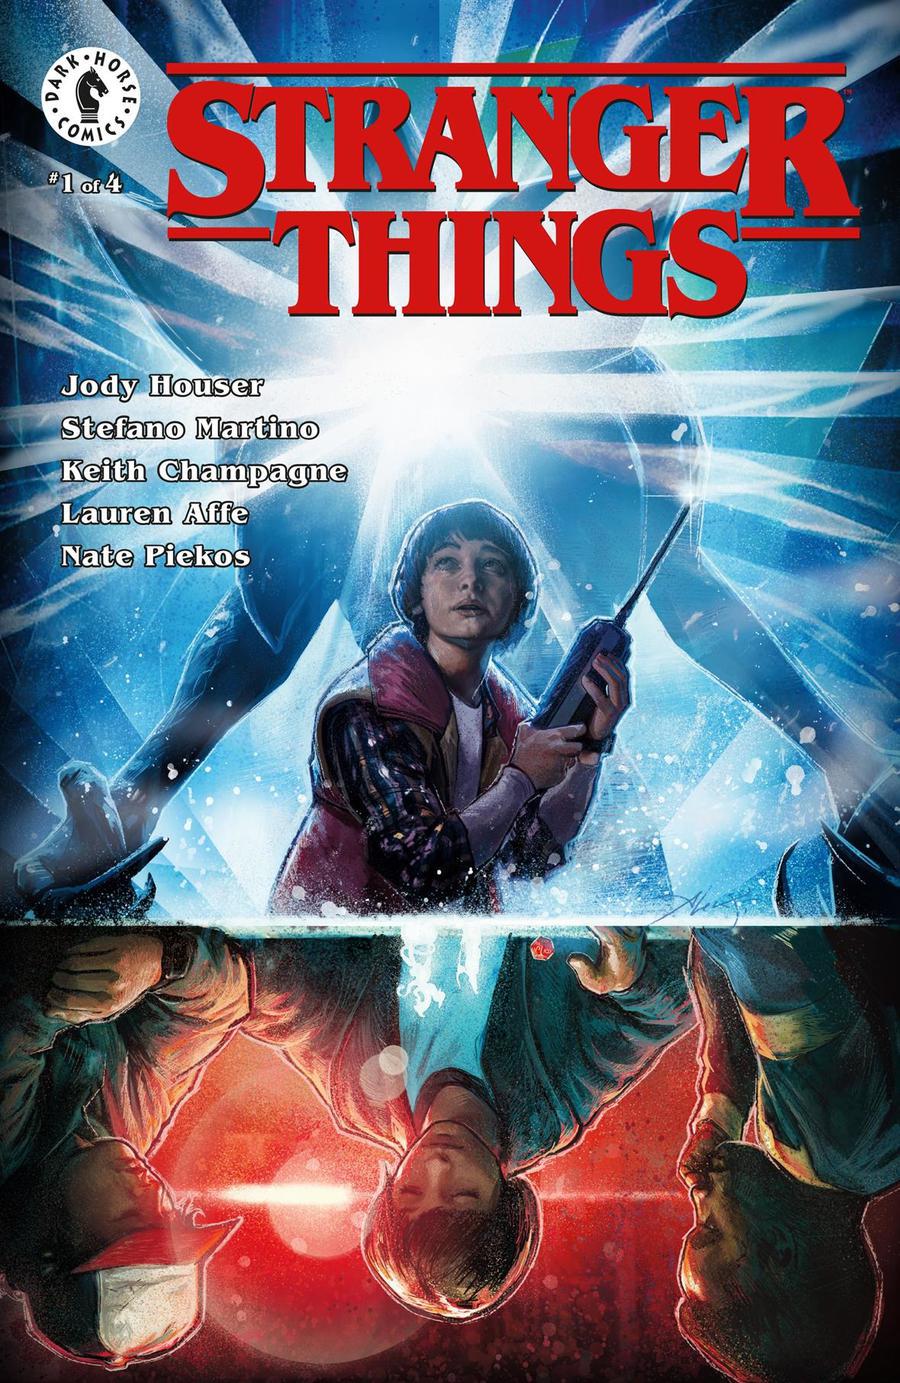 Stranger Things #1 Cover E DF Aleksi Briclot Cover Signed By Keith Champagne